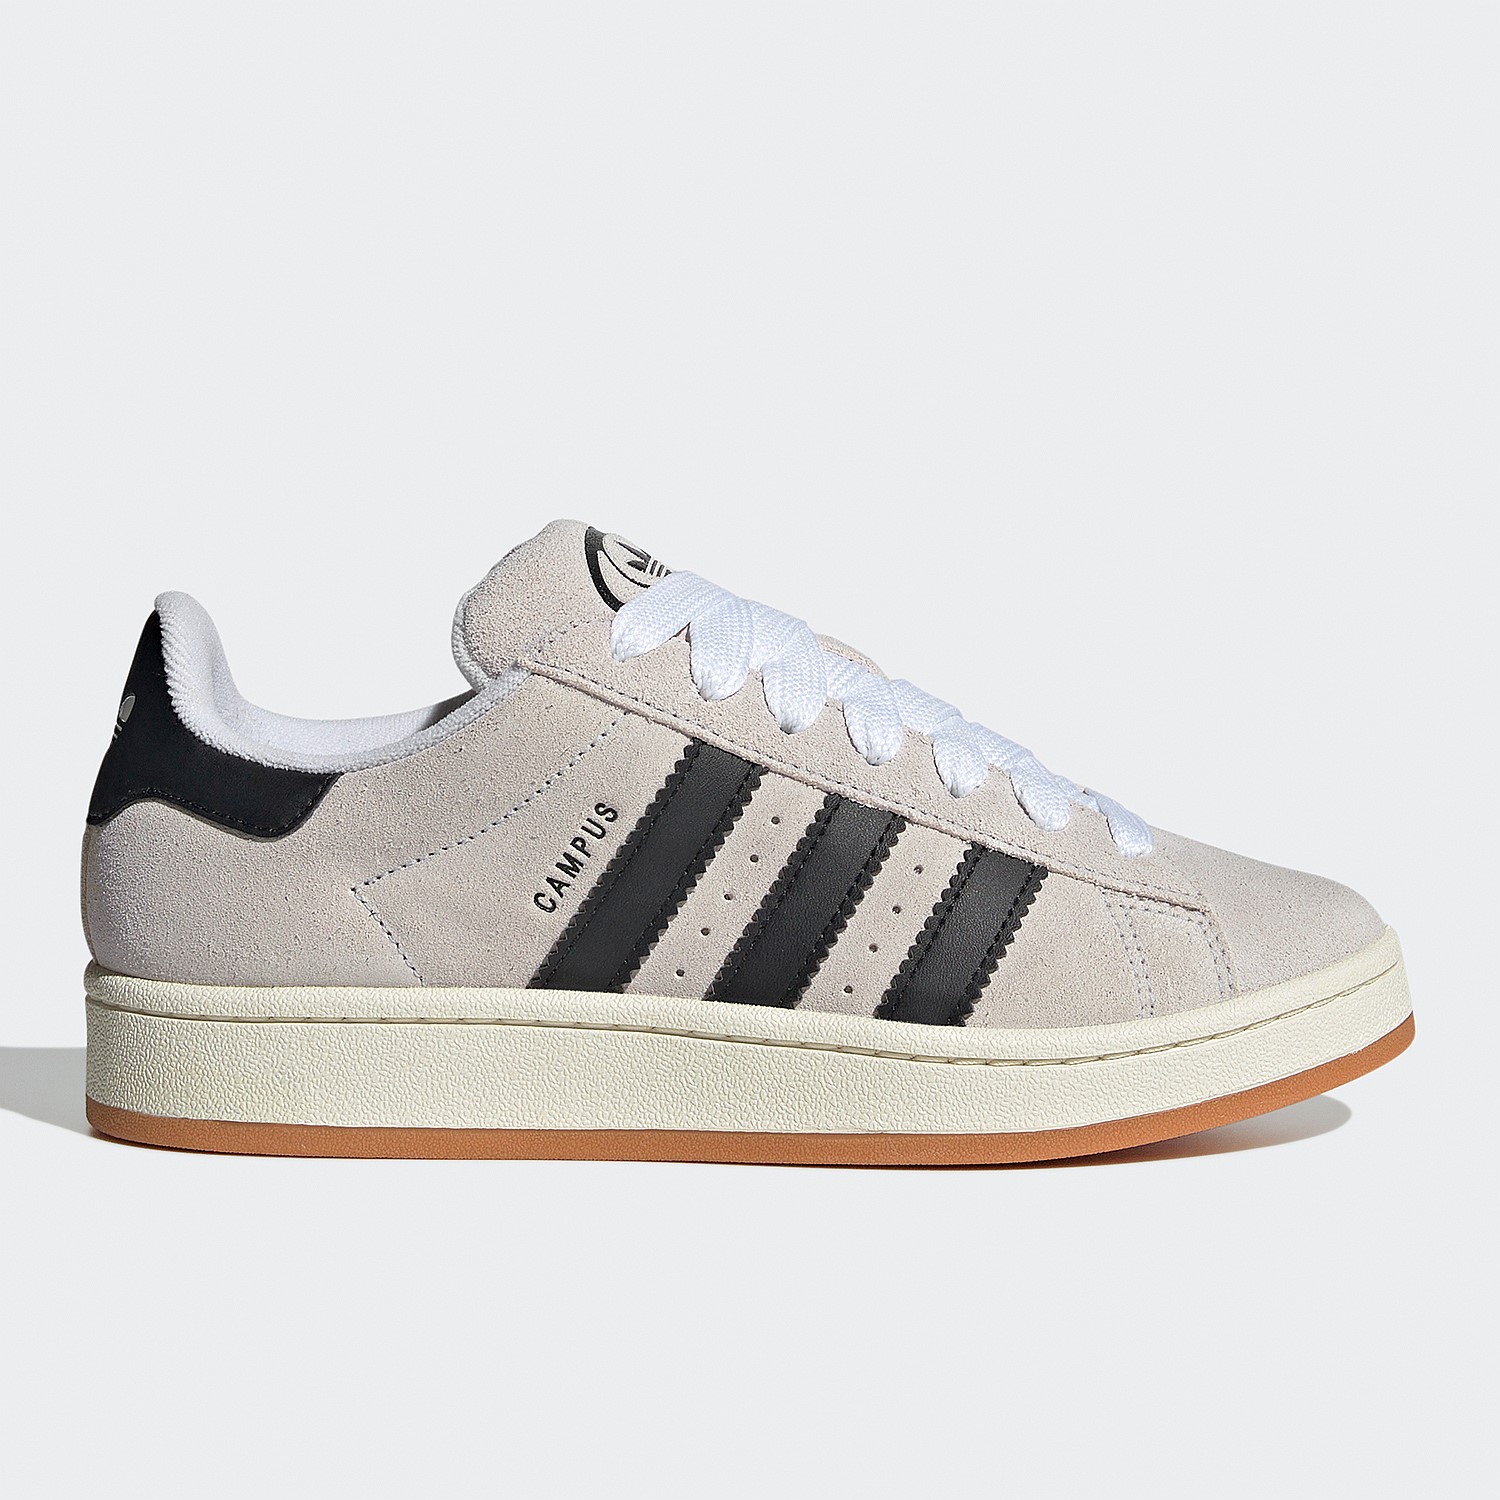 BB1092 - ebay boost mobile phones sale philippines 2016 'Leather Cage' -  cq2413 adidas women sneakers original | RvceShops